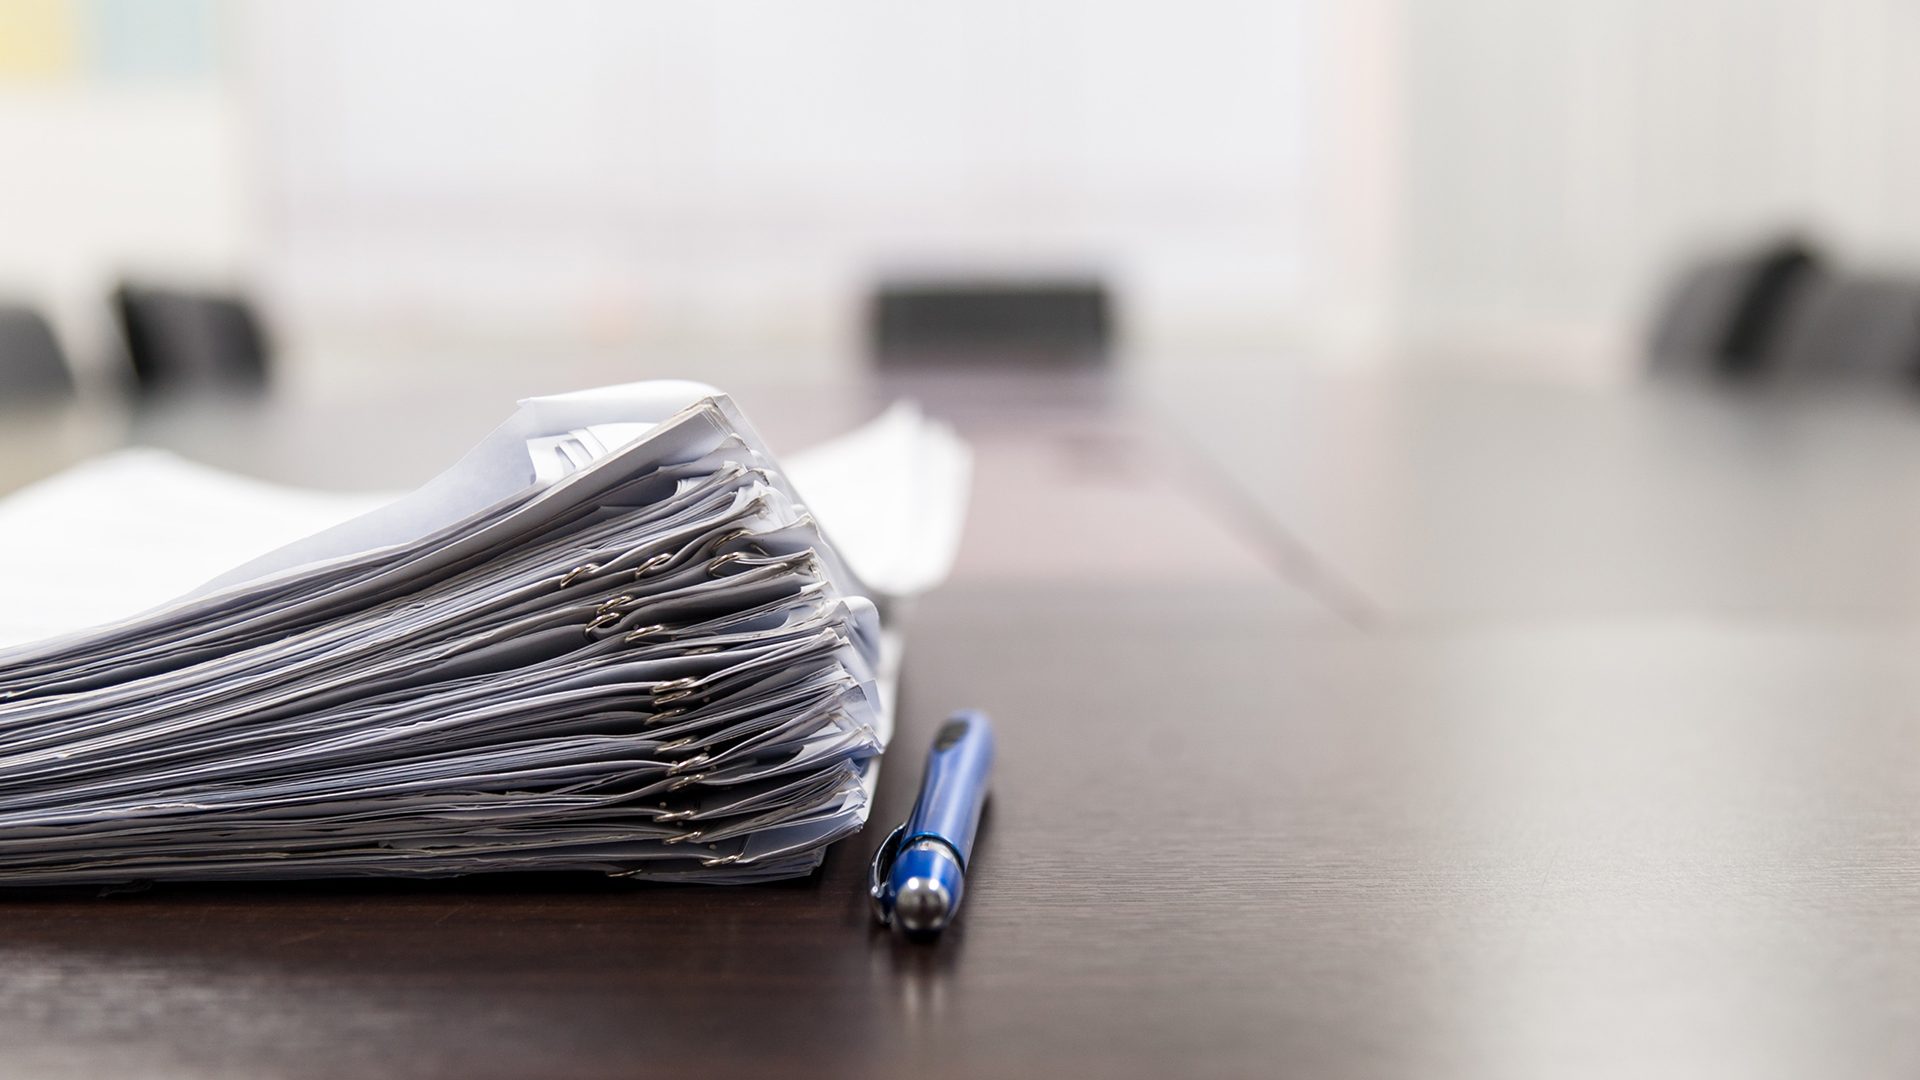 Pile of documents and blue pen on the meeting table with blurred background. Conceptual job interview.; Shutterstock ID 608600555; PO: Mariela; Job: StreetEasy Blog